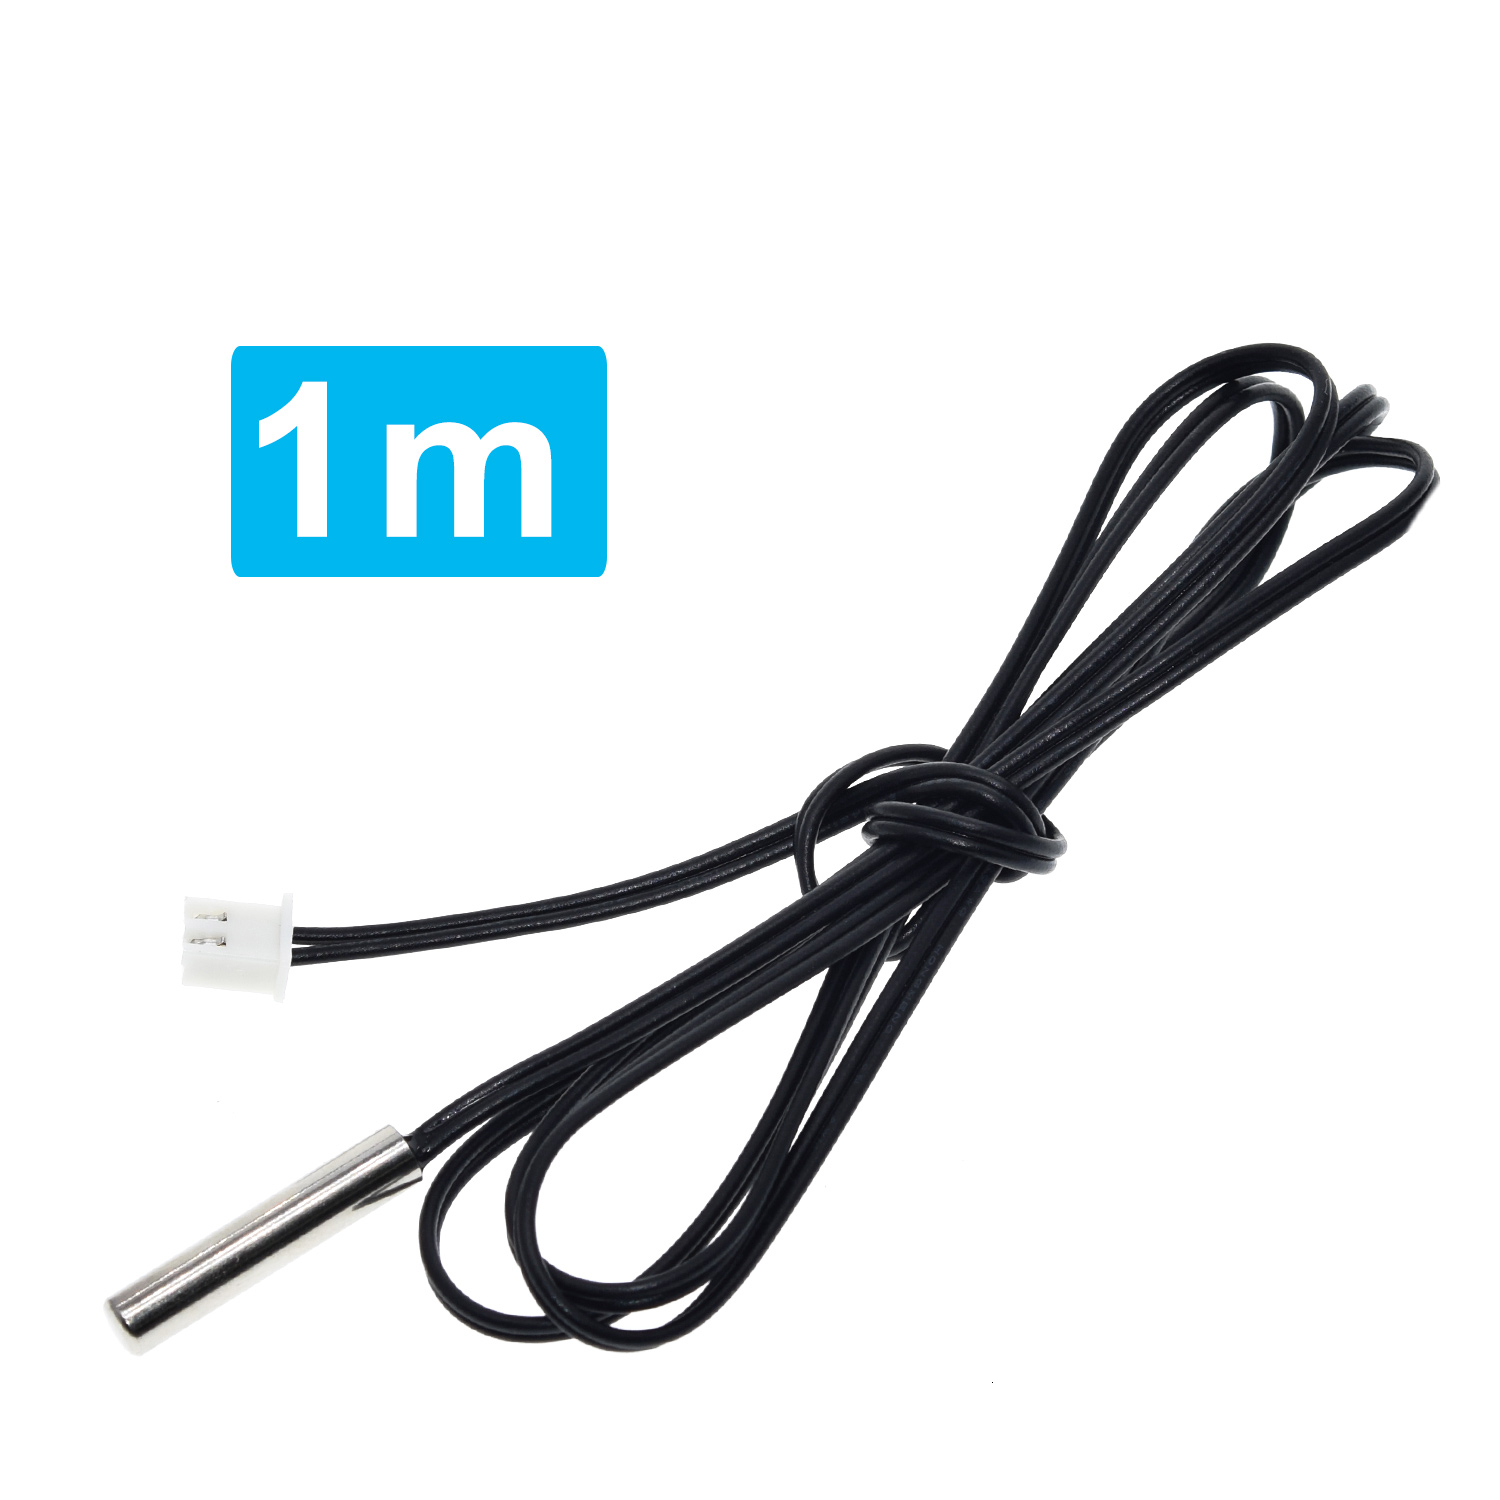 dImg2_1M Cable29.jpg